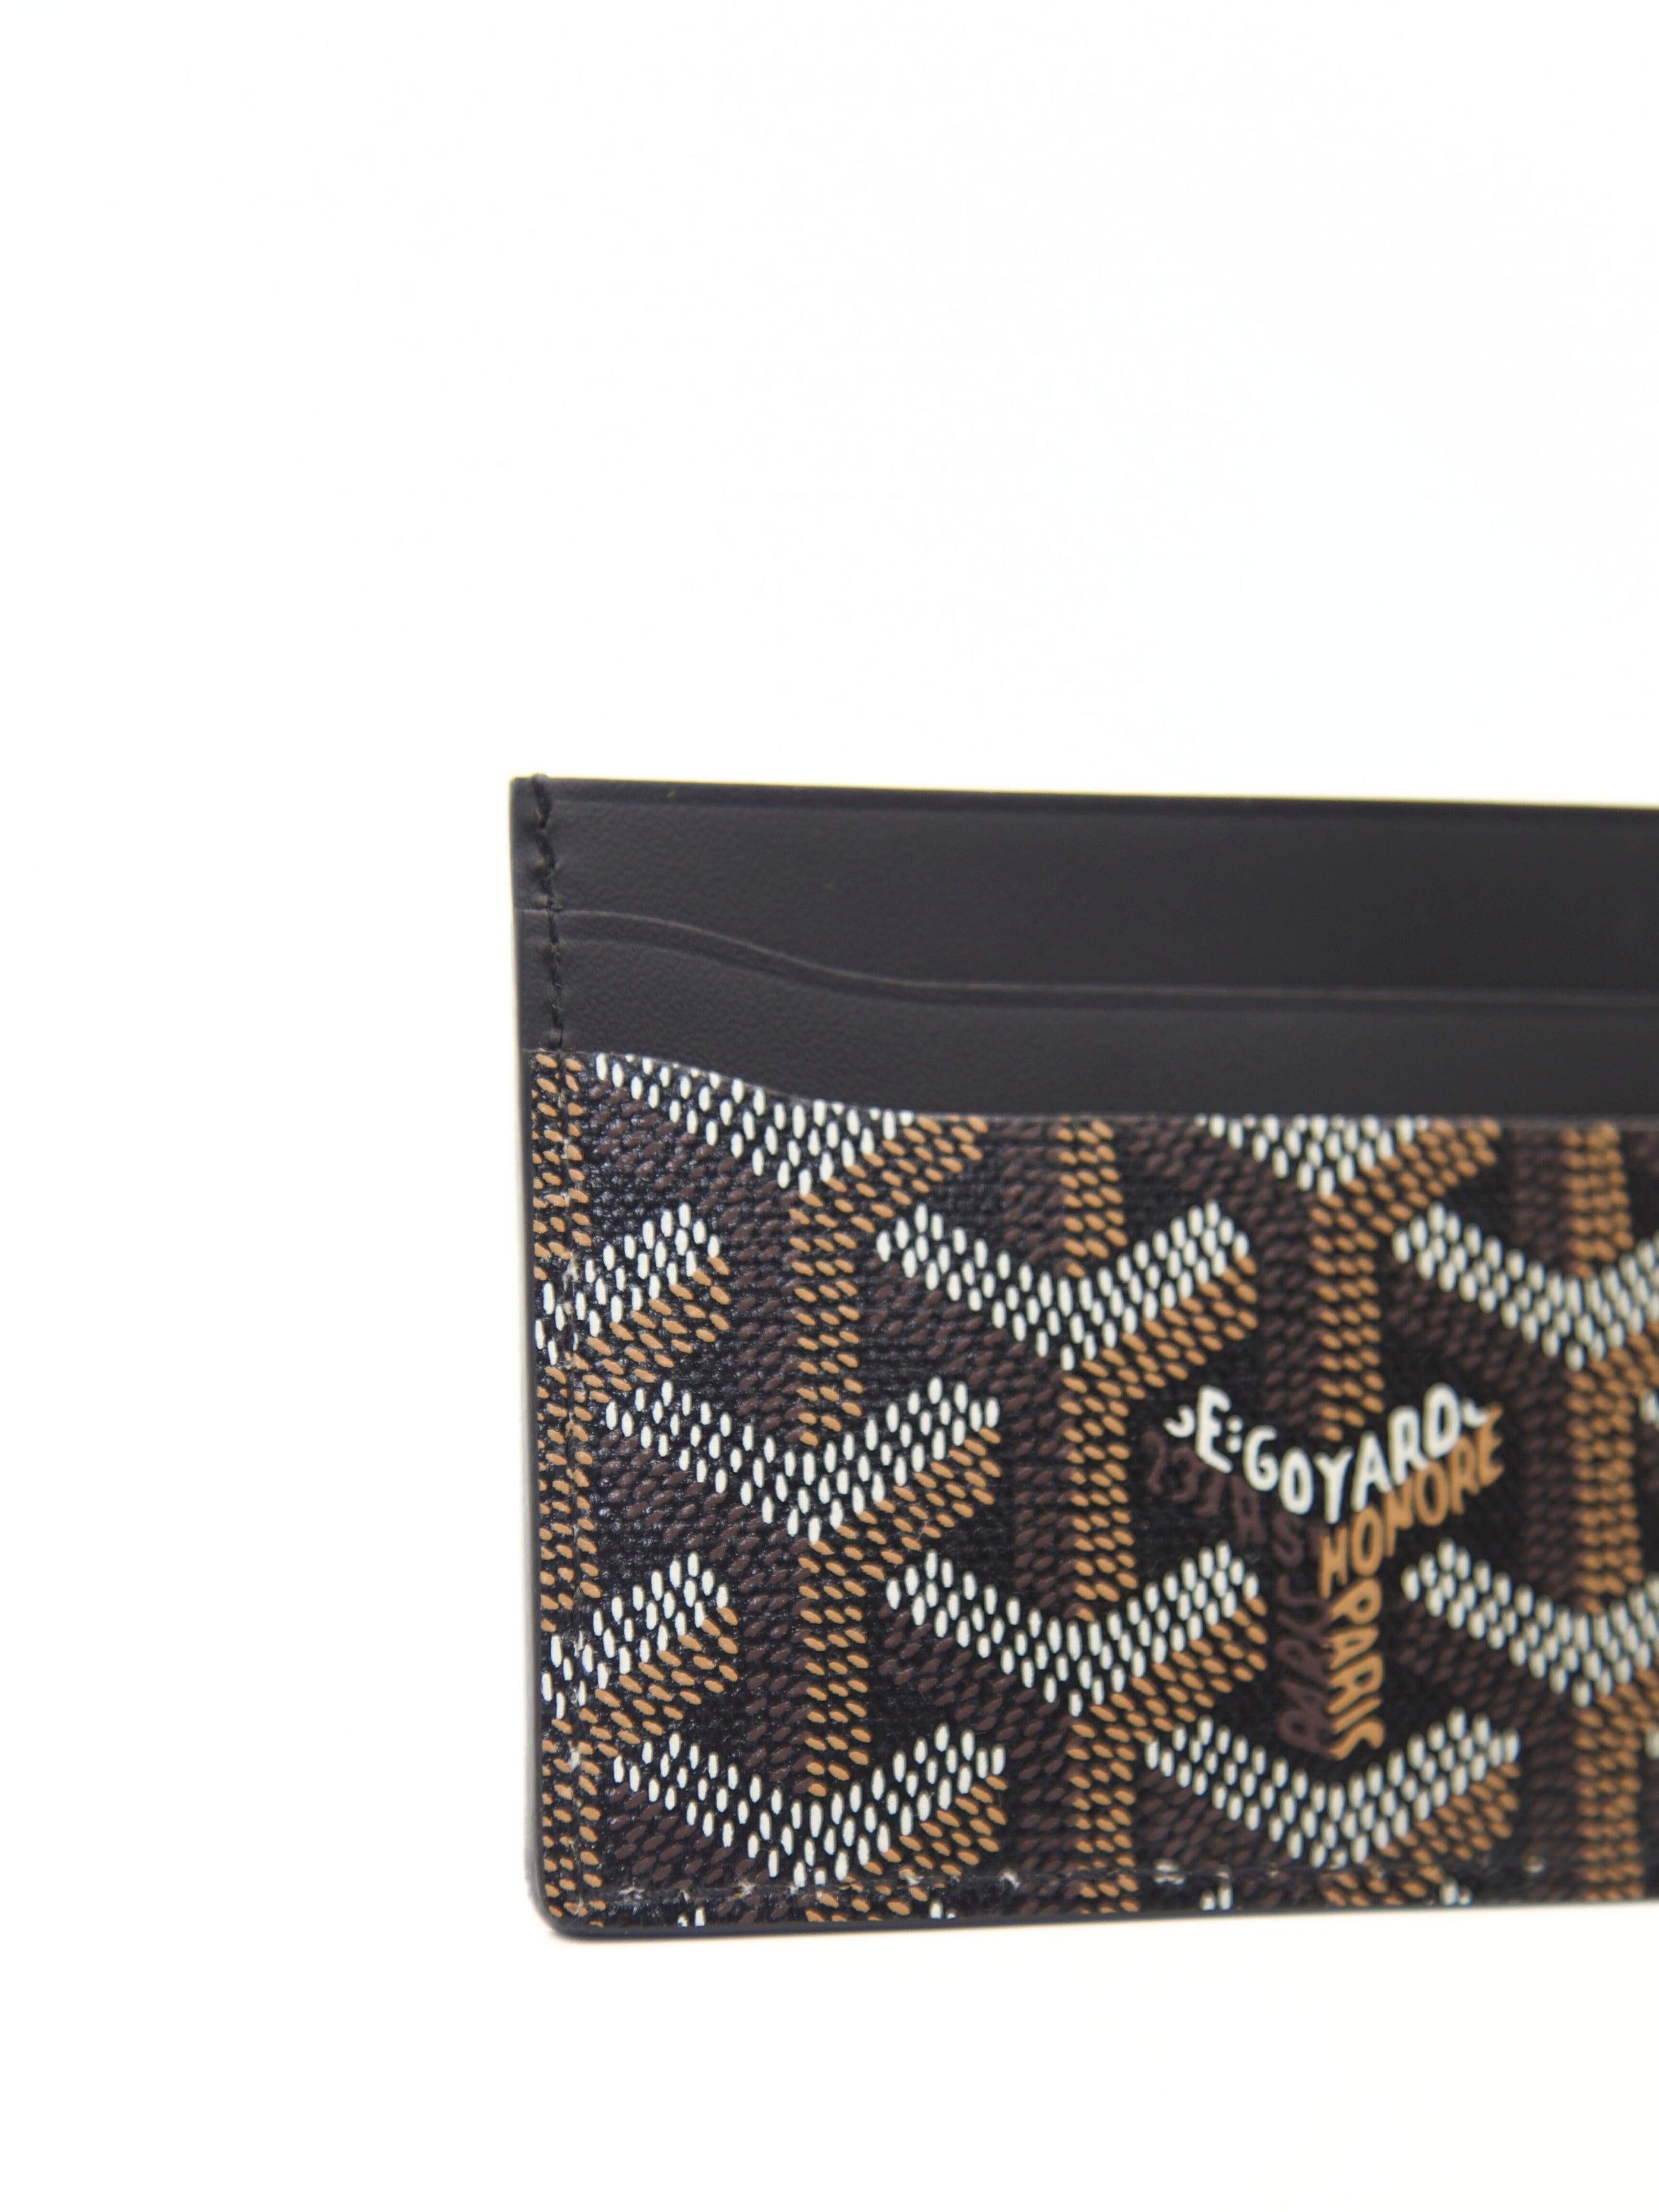 GOYARD Saint-Sulpice Card Wallet in Black In New Condition For Sale In London, GB